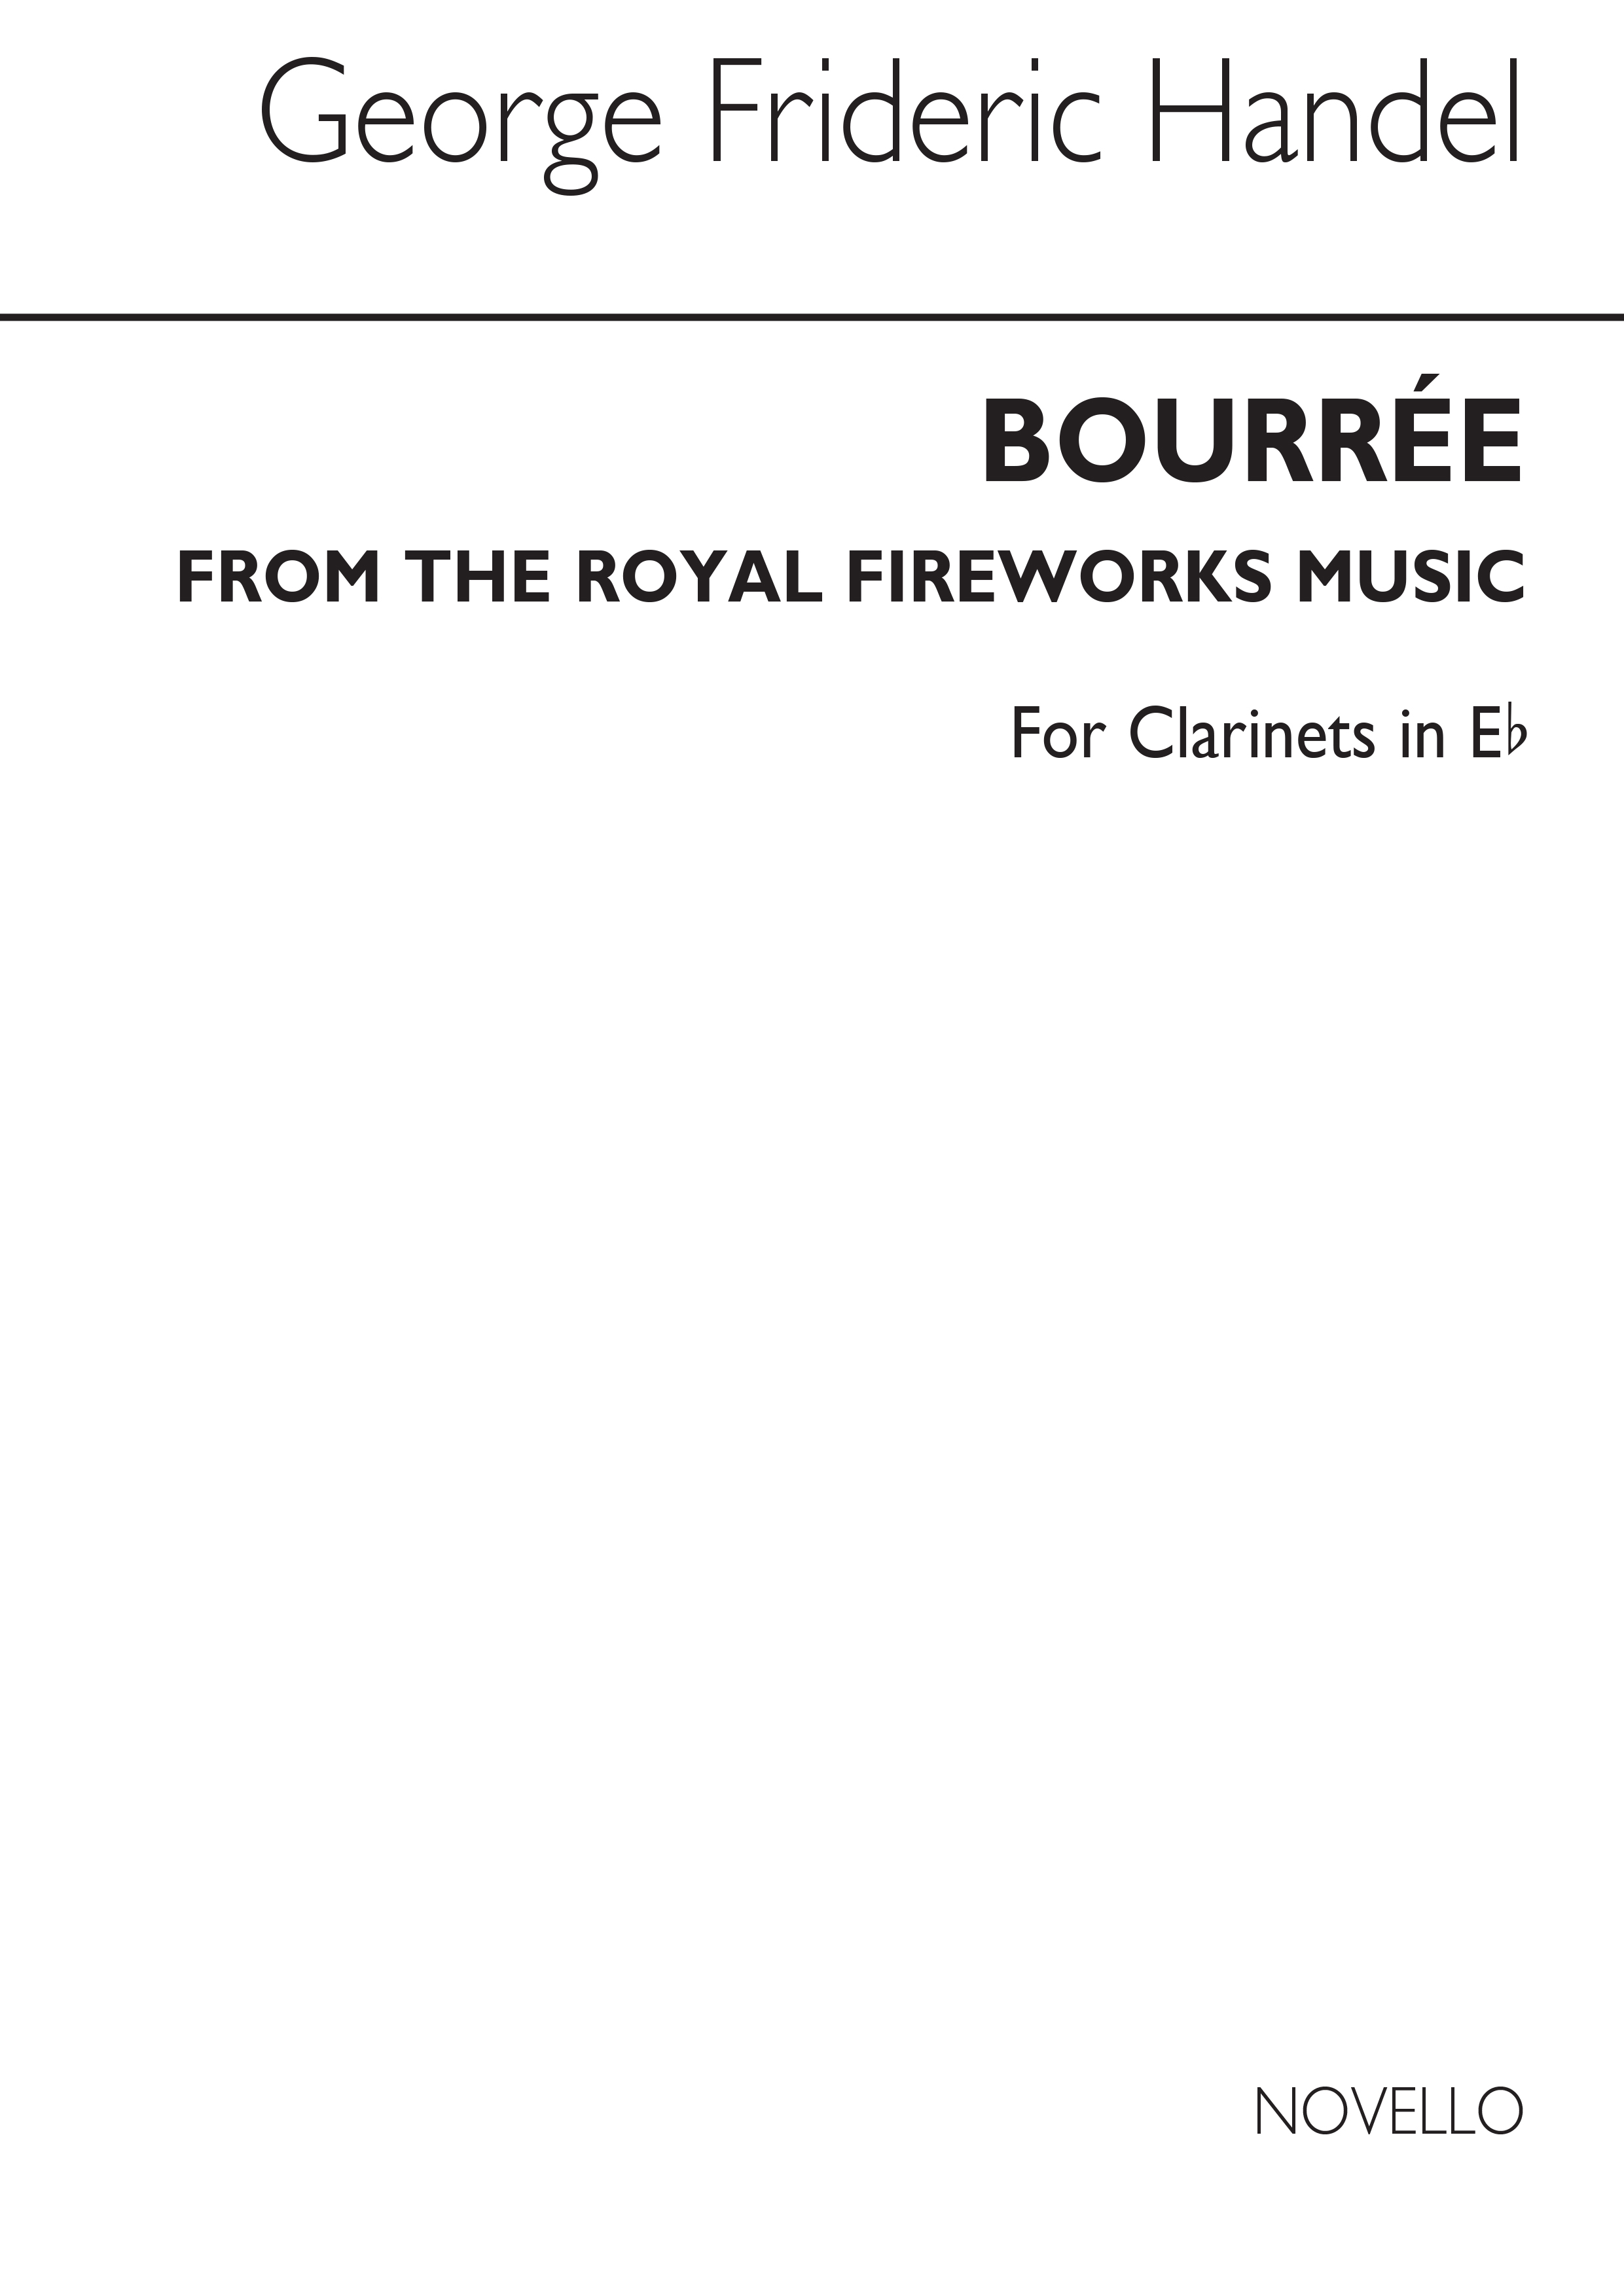 Georg Friedrich Hndel: Bourree From The Fireworks Music (Clt In Eb): Clarinet: